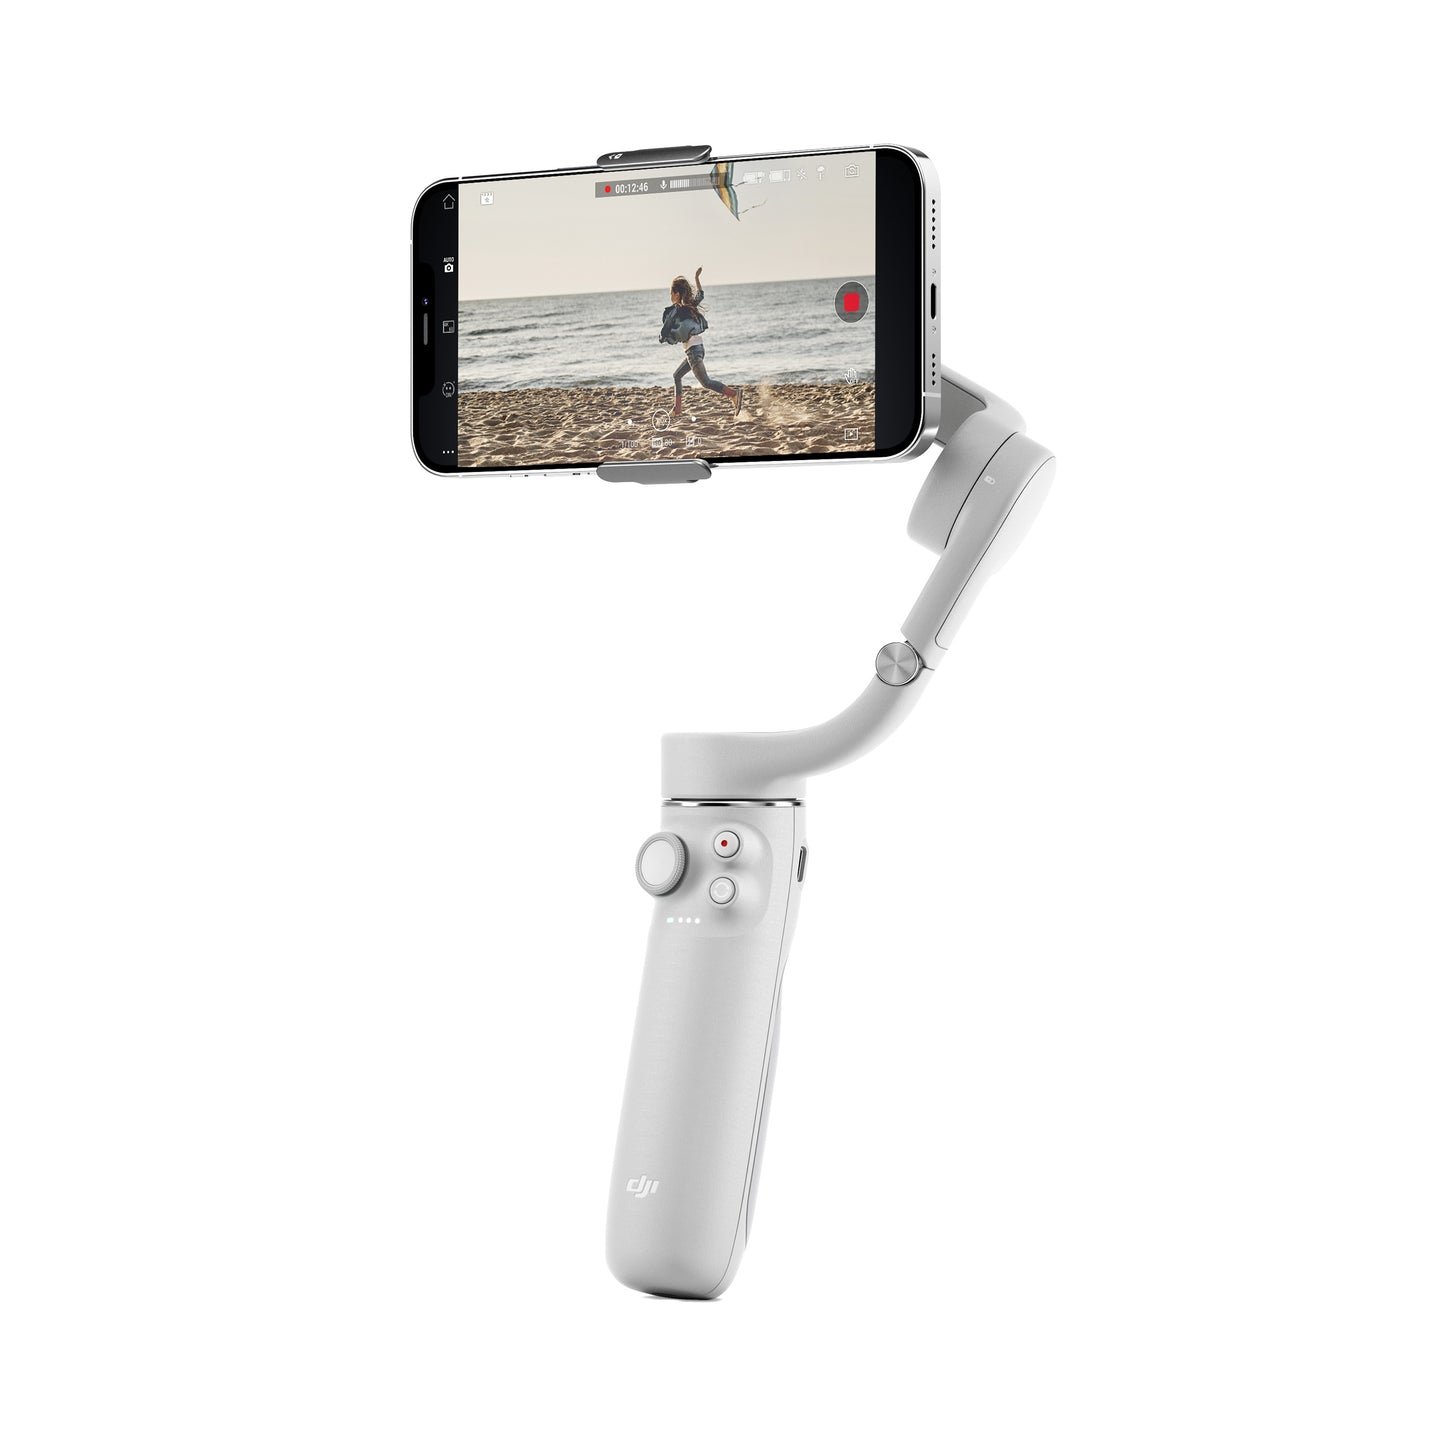 DJI OM5 Osmo 5 Mobile Portable 3-Axis Smartphone Gimbal Stabilizer with ActiveTrack 4.0, Extension Rod, Magnetic Clamp Design and DJI Mimo App Support (Sunset White, Athens Gray)